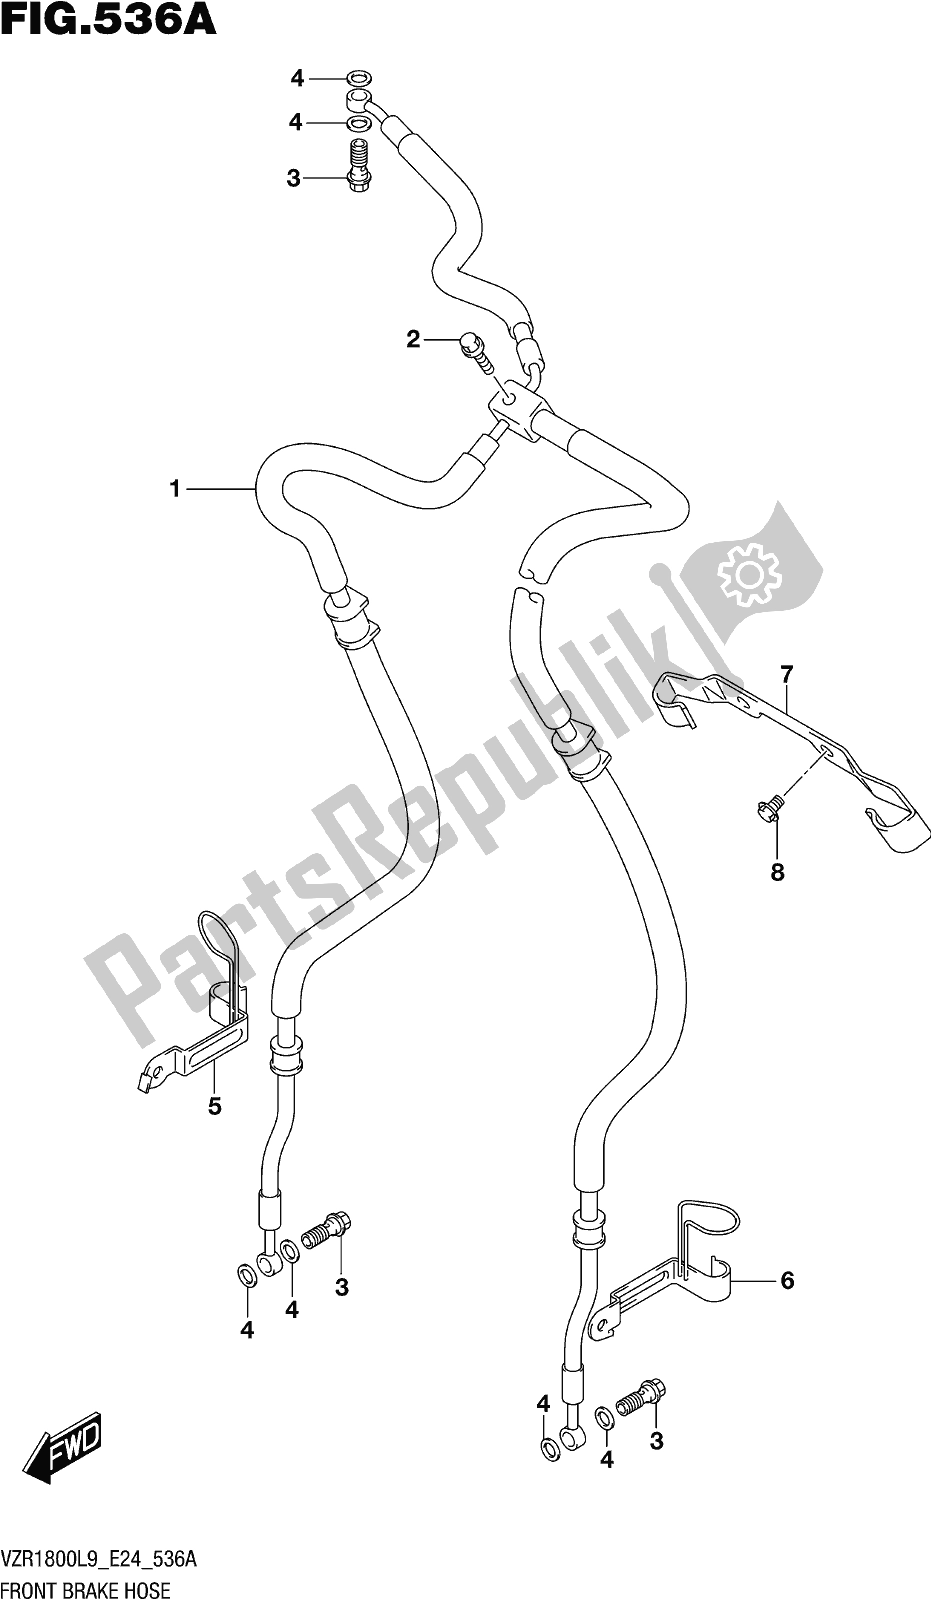 All parts for the Fig. 536a Front Brake Hose of the Suzuki VZR 1800 BZ 2019